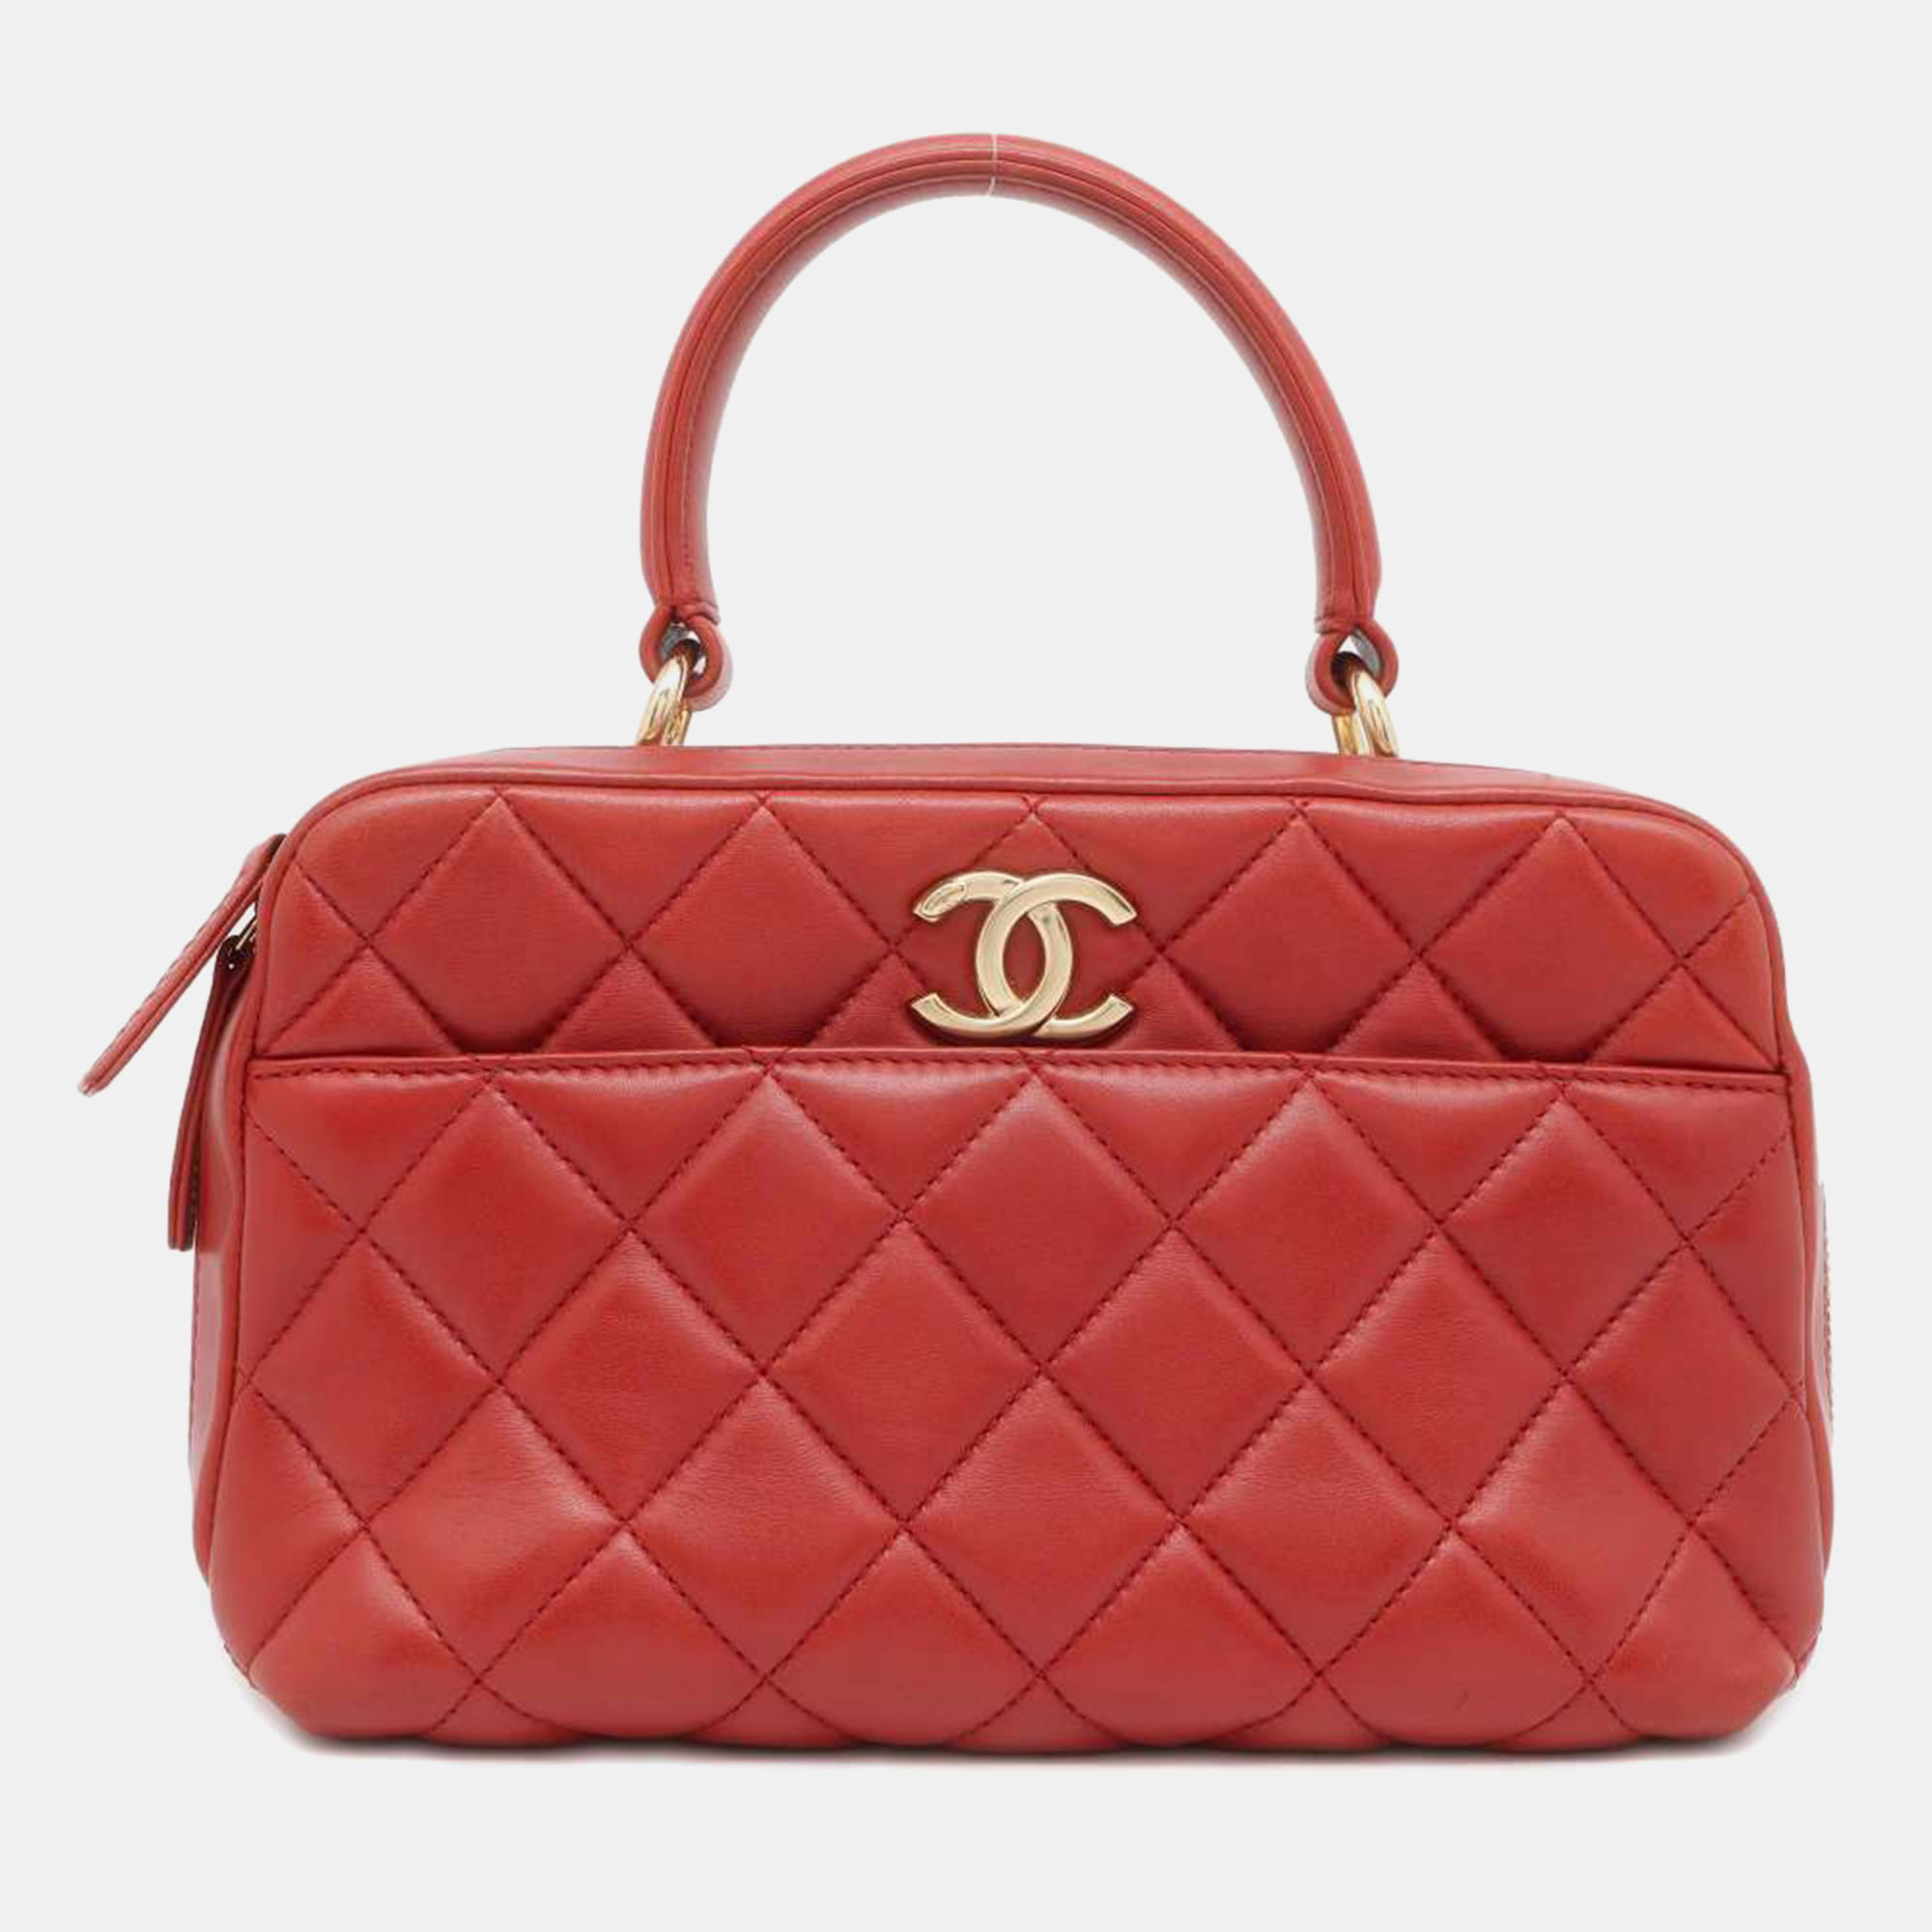 Pre-owned Chanel Red Lambskin Leather Bowling Bag